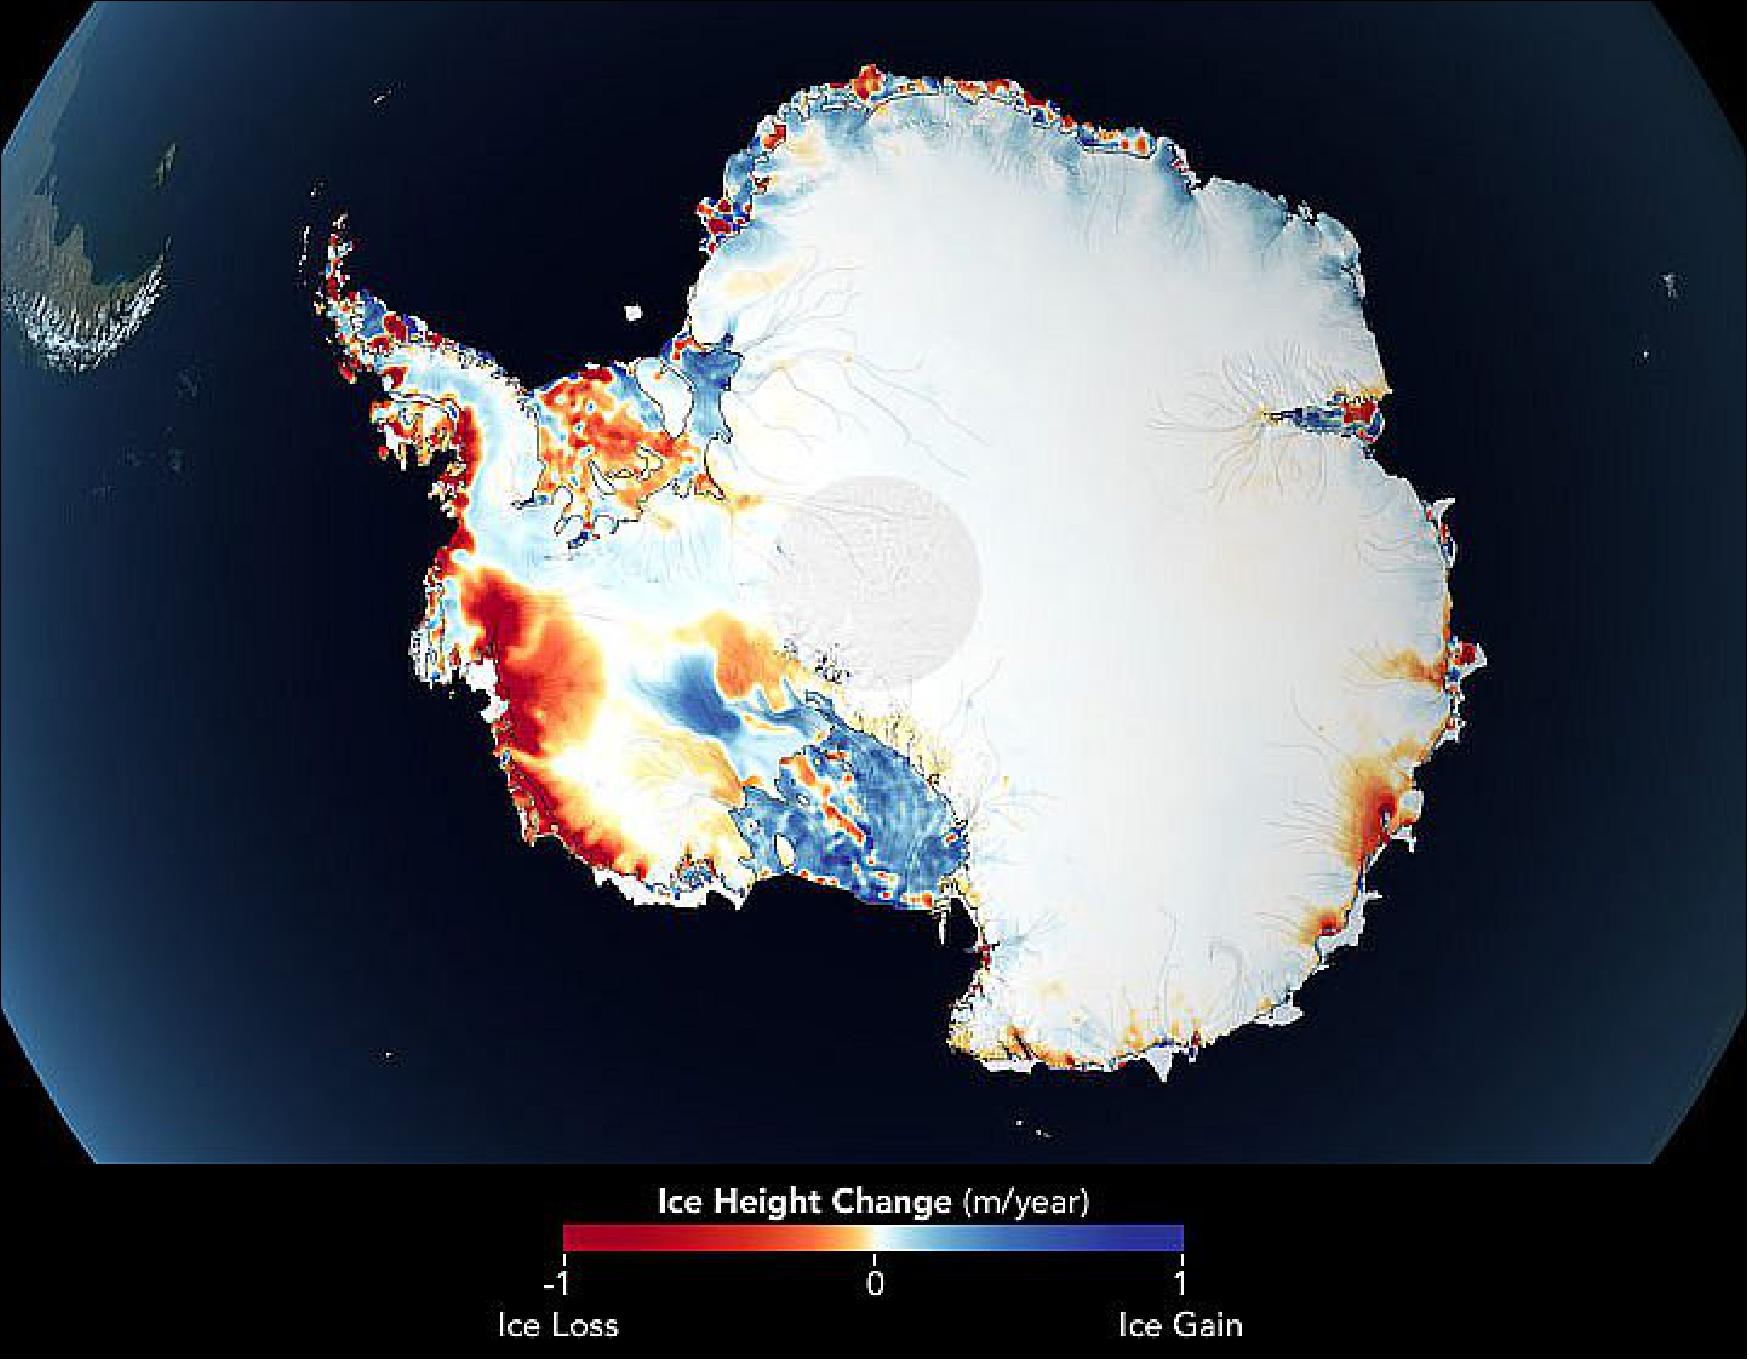 Figure 24: With Earth’s ice steadily shrinking, scientists are trying to understand the exact locations and pace of the changes. The map below shows changes in land ice thickness in Antarctica between 2003-2009 and 2018-2019, as measured by ICESat and ICESat-2. (Similar measurements have also been mapped for Greenland.) In a study published in June 2020, scientists found that ice losses around the edges of Greenland and West Antarctica have contributed 14 millimeters (0.55 inches) to sea level rise since 2003. That is one third of the total amount of sea level rise observed over that period (image credit: NASA Earth Observatory)